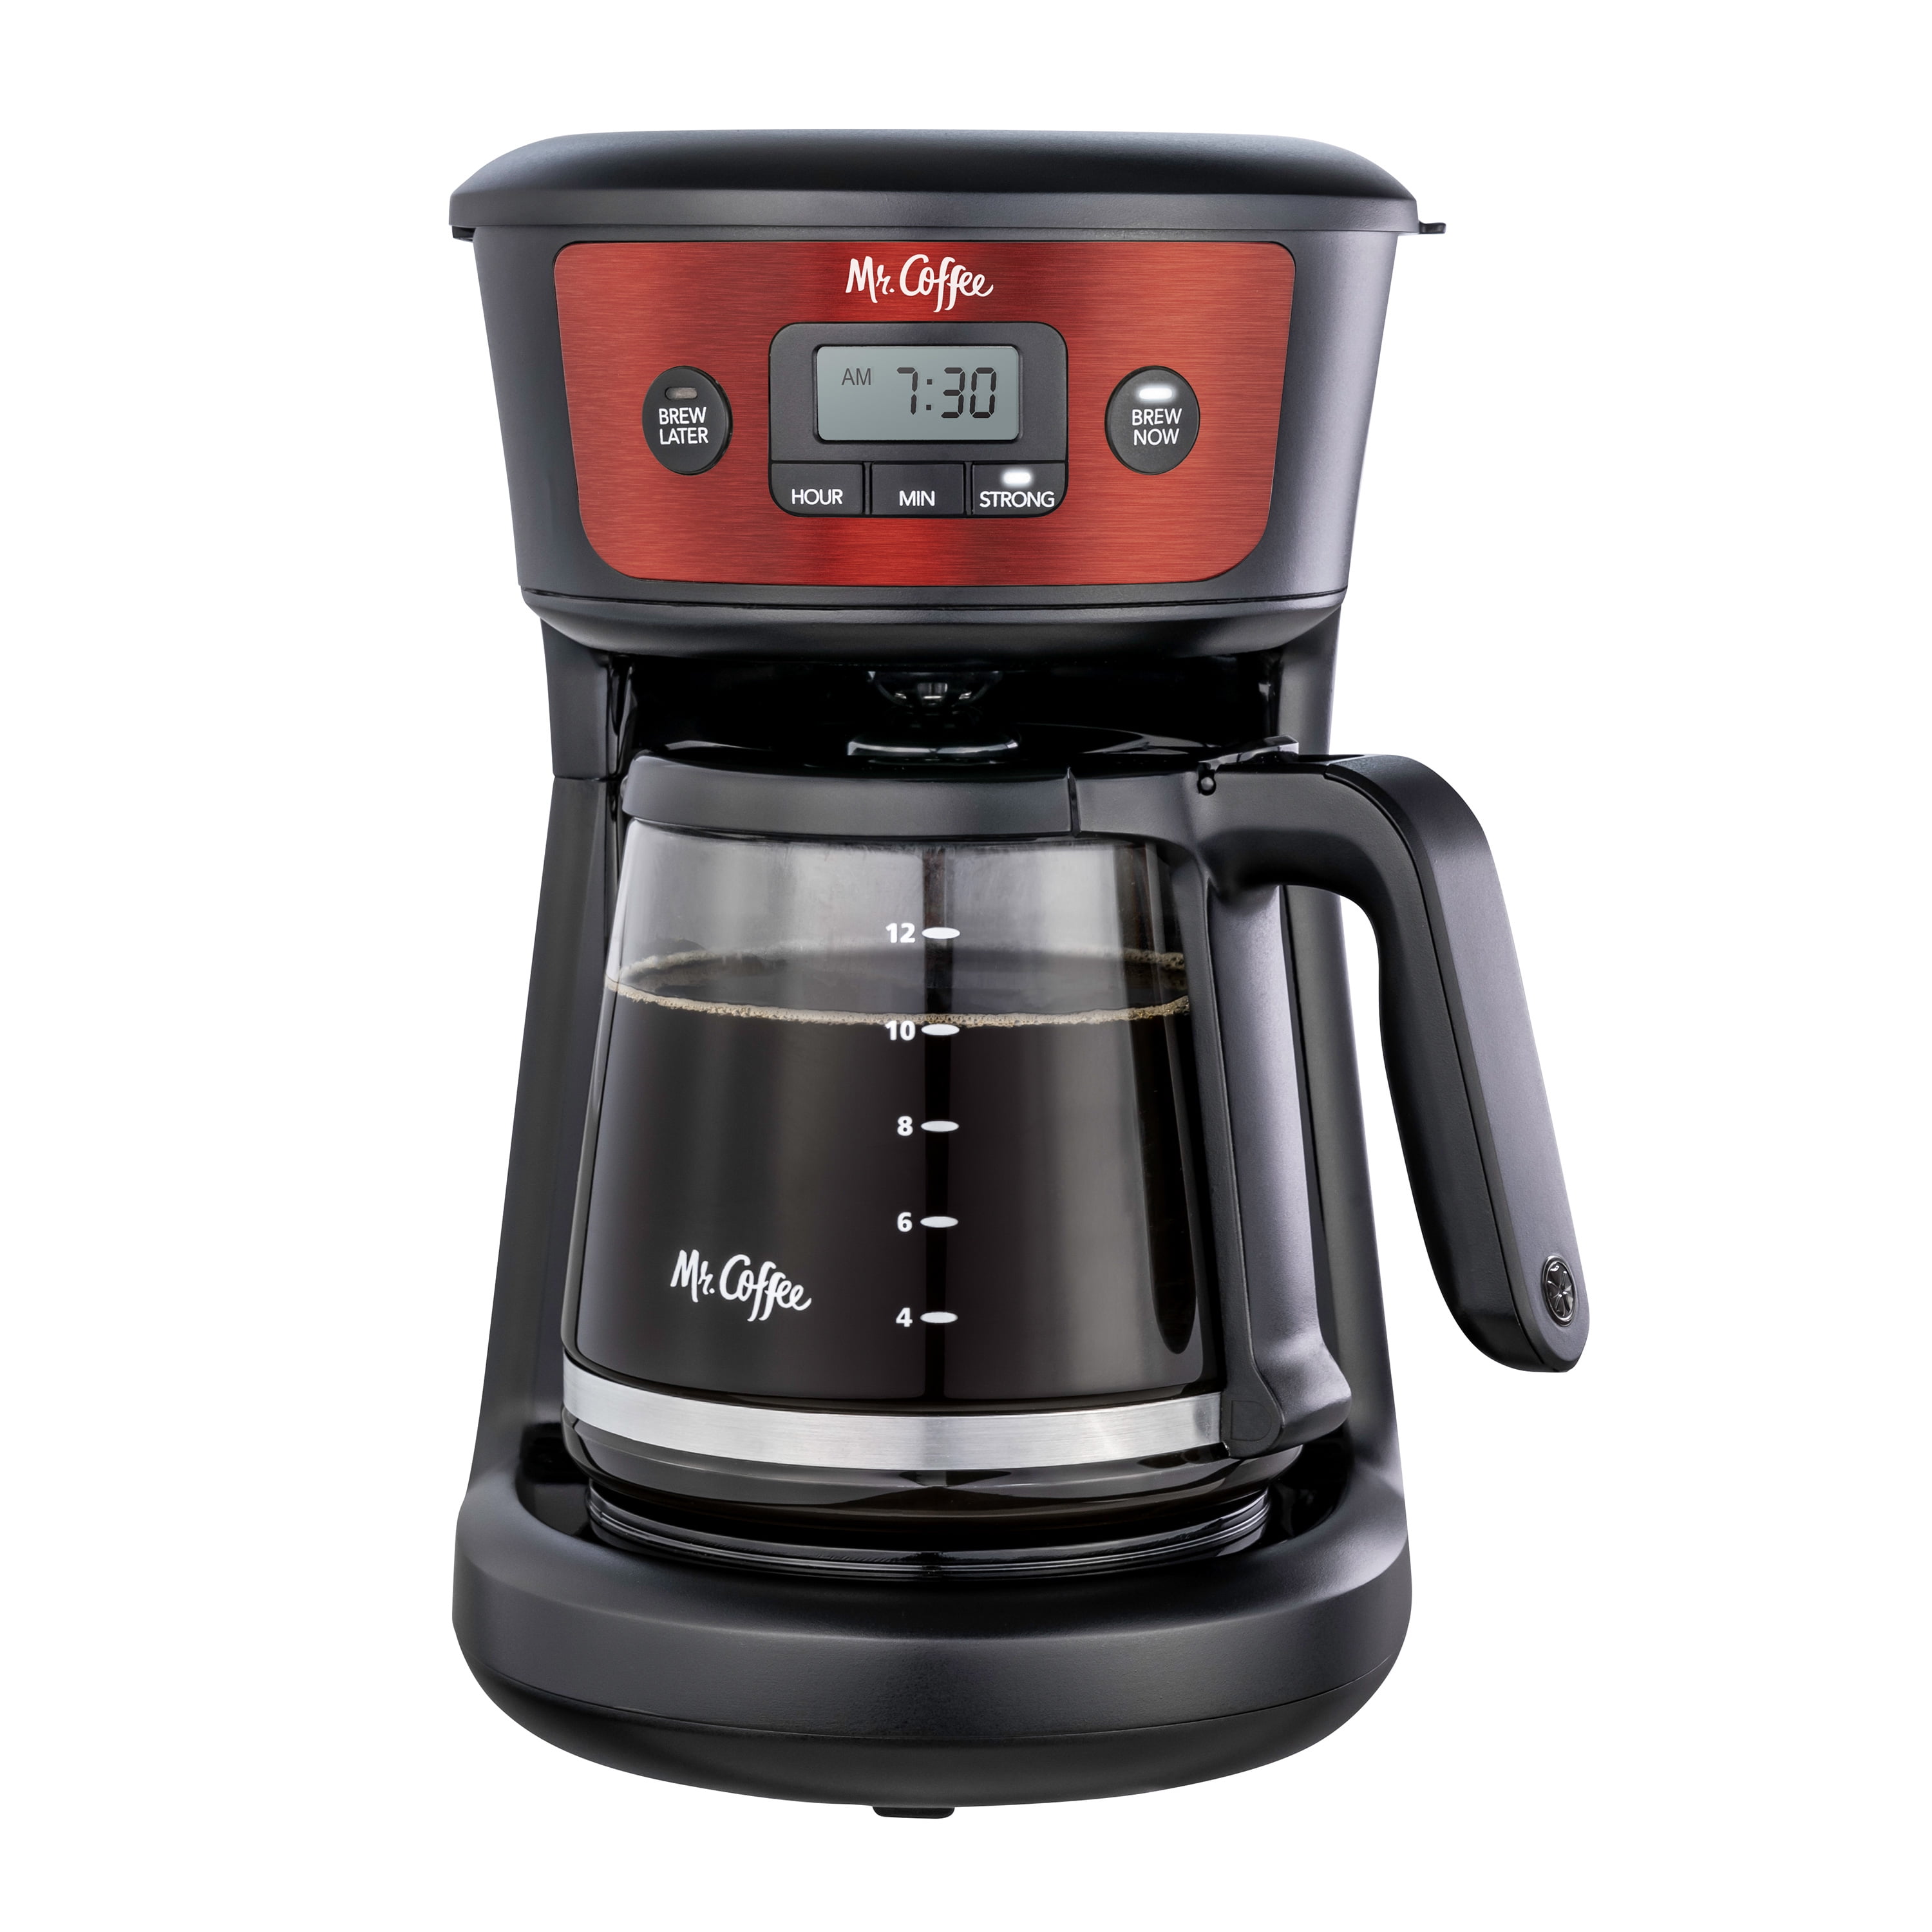 Mr. Coffee 12-Cup Capacity Programmable Drip Coffee Maker, Red